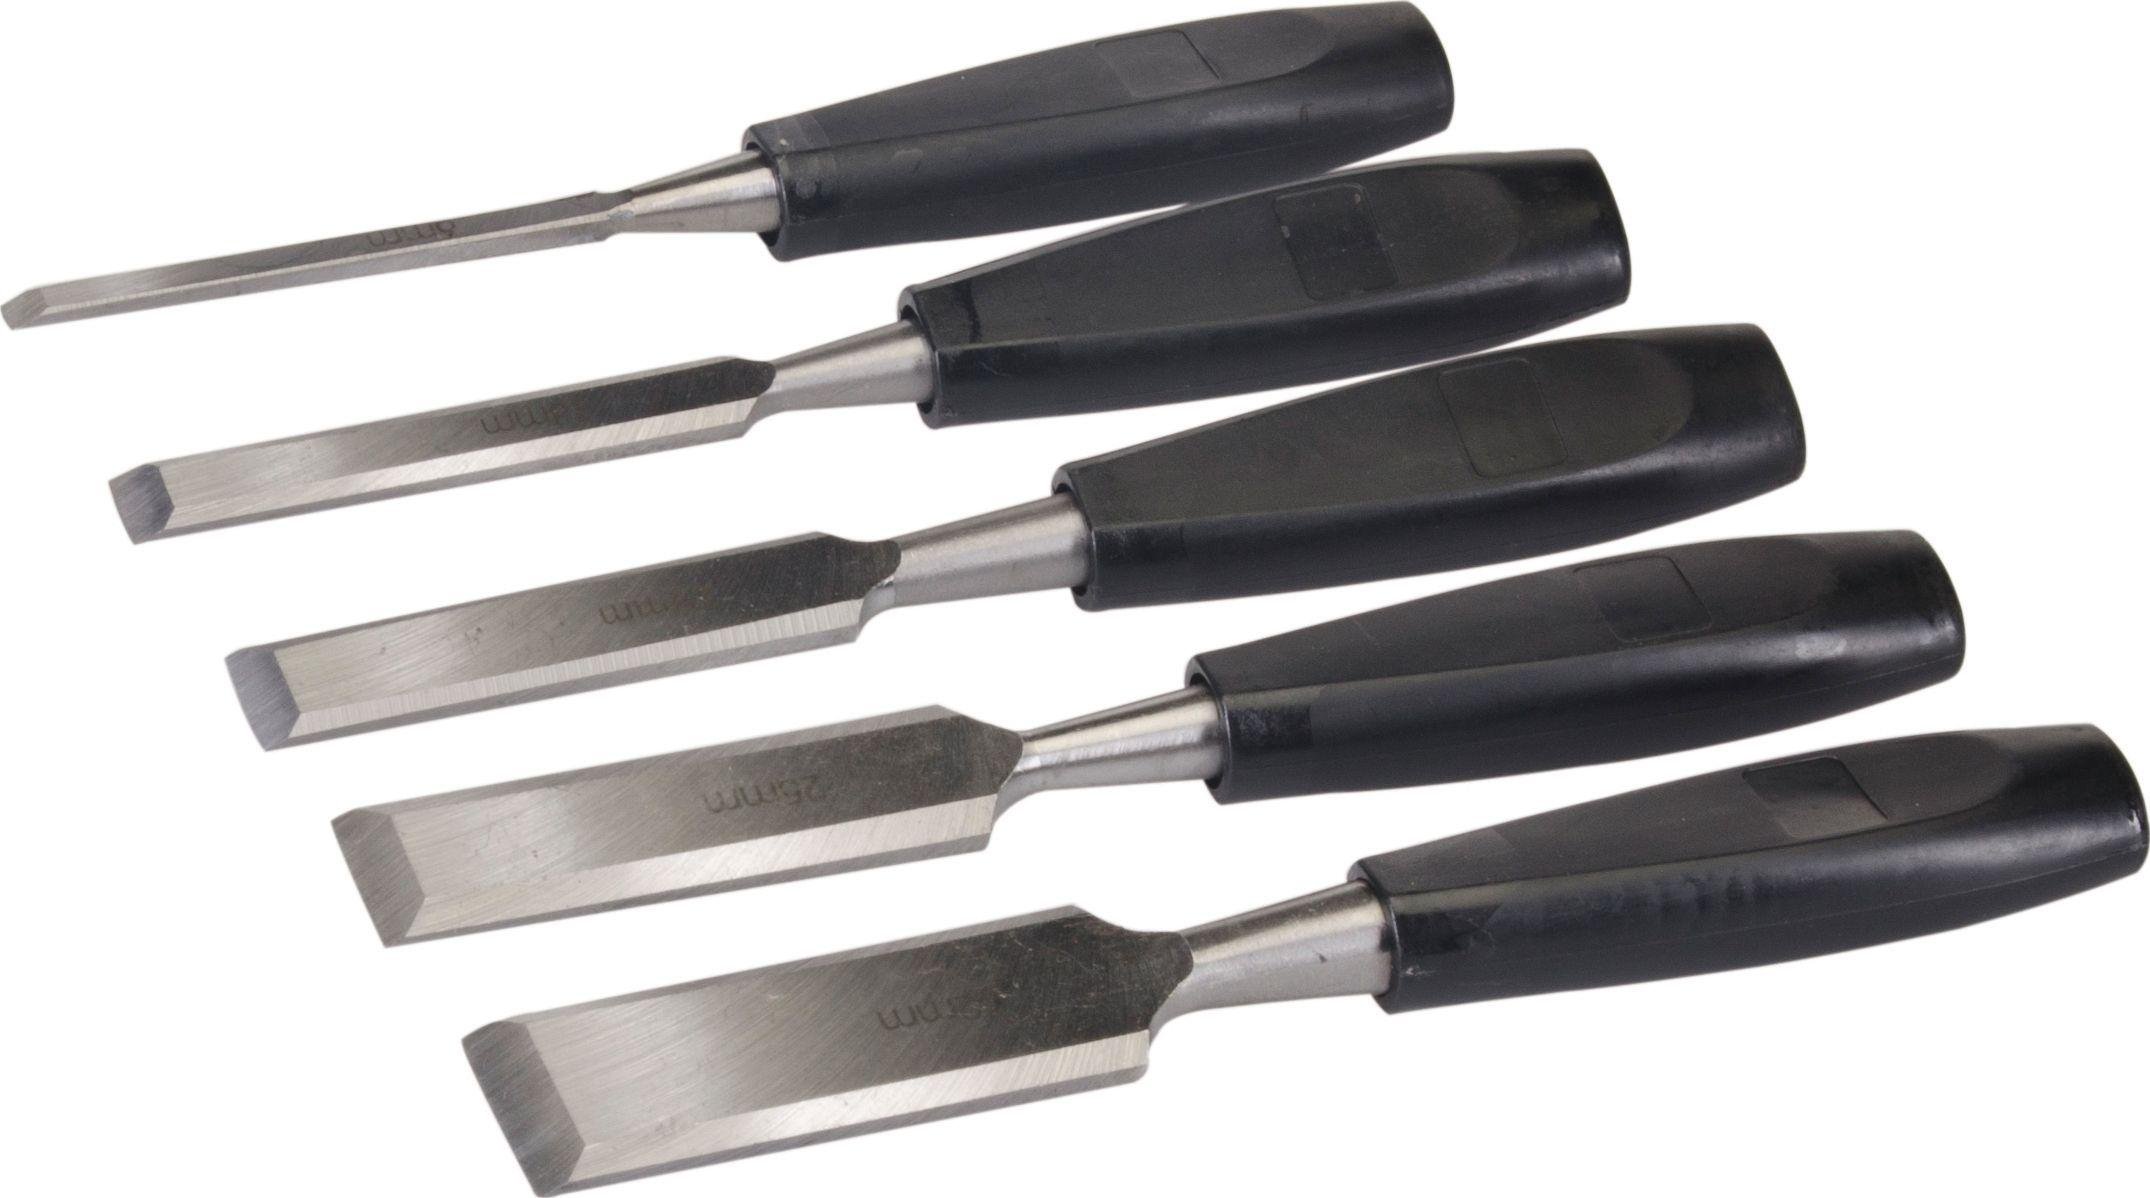 Silverline - Wood Chisels 5 Piece Set Review